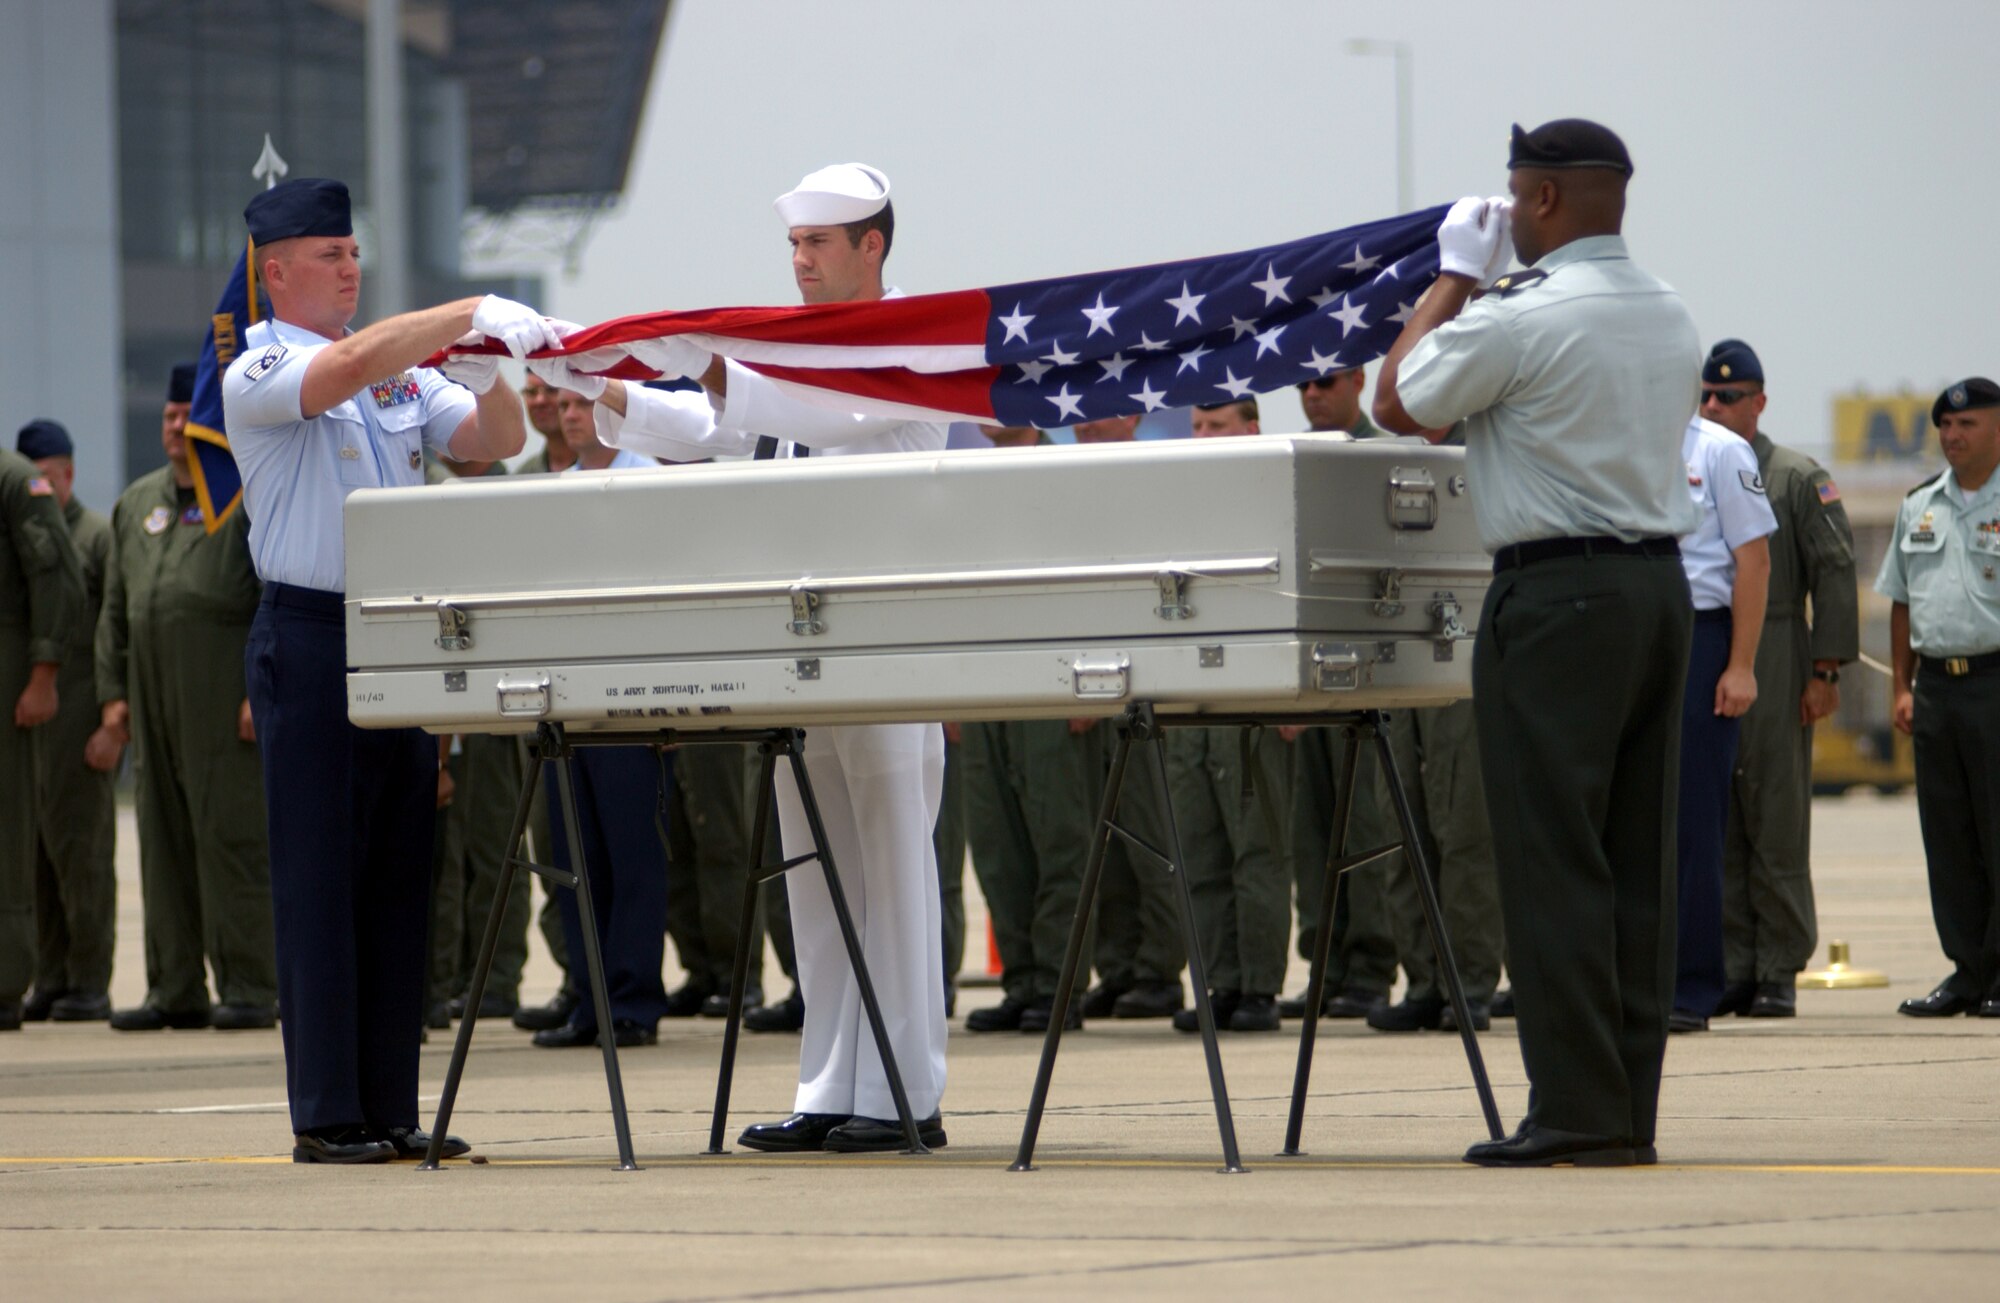 ANDERSEN AIR FORCE BASE, Guam -- Honor Guard members from the Joint POW/MIA Accounting Command drape an American flag over the remains of one of two servicemembers repatriated from Hanoi, Vietnam, on May 28.  Airmen of the 445th Airlift Wing and Maj. Gen. Ed Mechenbier, the last Airman still serving who was a prisoner of war in Vietnam, flew the Hanoi Taxi to bring their fallen comrades home.  The Hanoi Taxi became the first C-141 Startlifter to repatriate American POWs from Vietnam on Feb. 12, 1973.  (U.S. Air Force photo by Master Sgt. Ken Wright) 